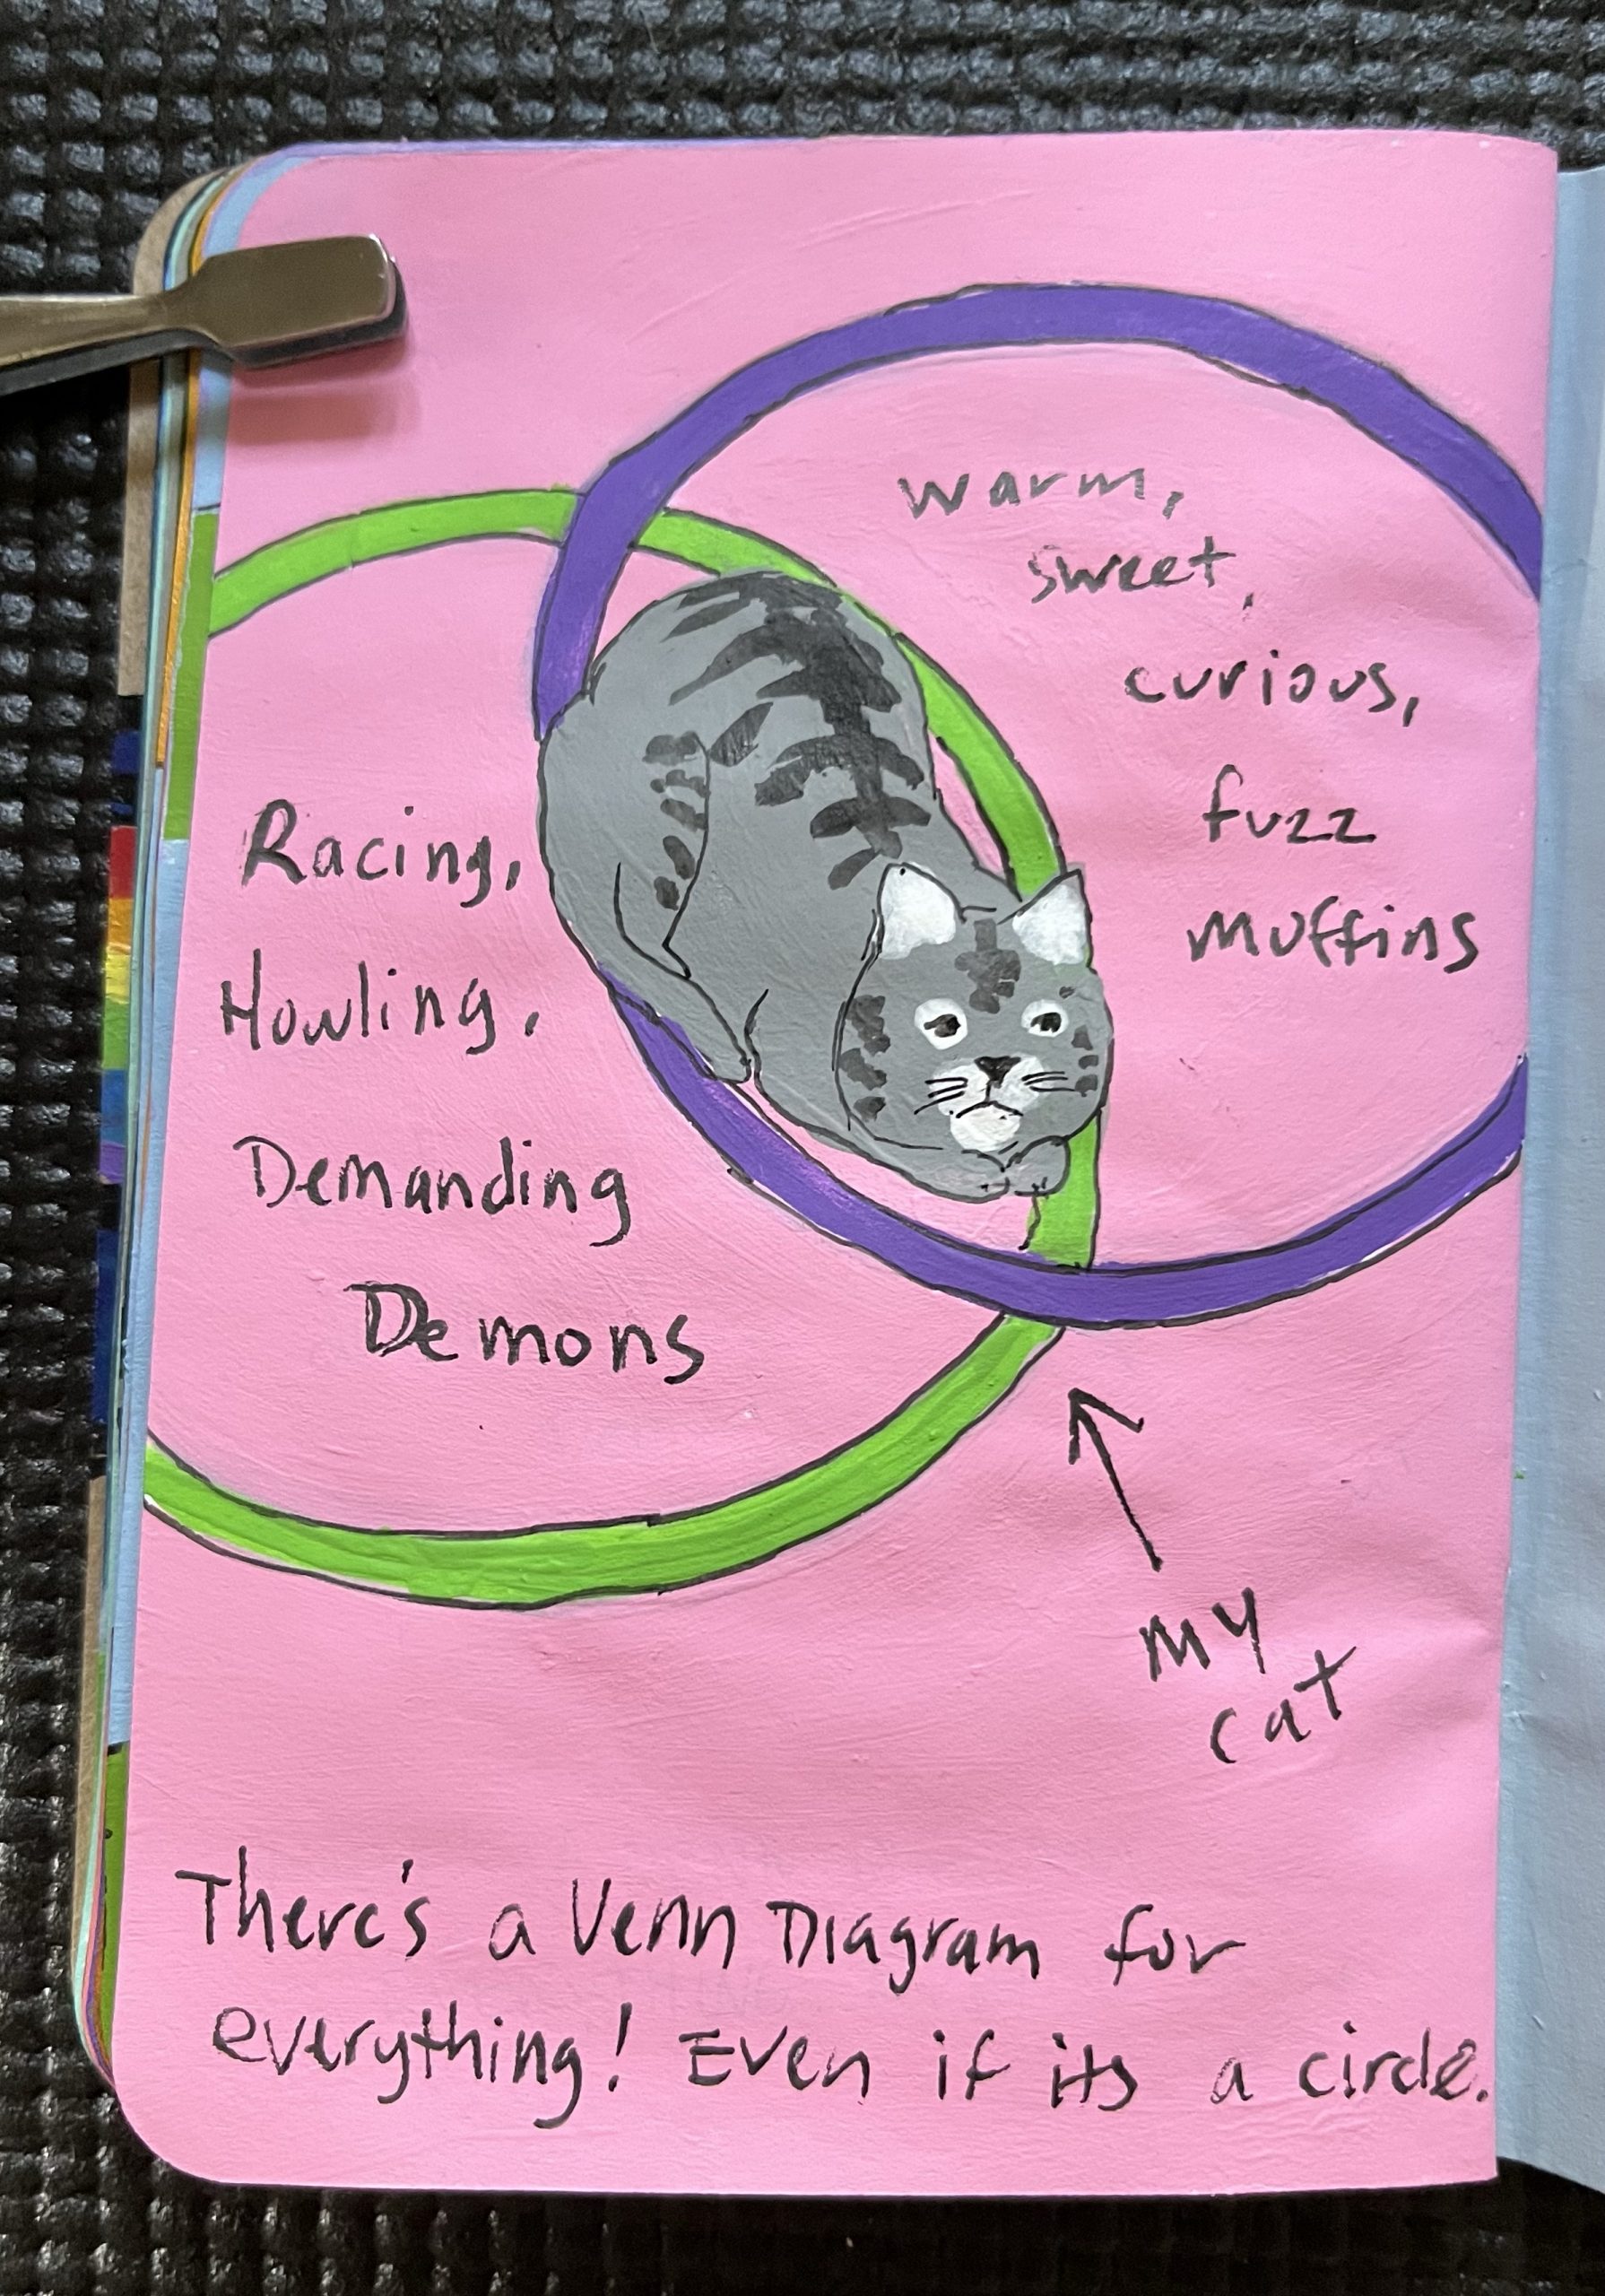 A painted page show a Venn diagram and a cat in the overlap.